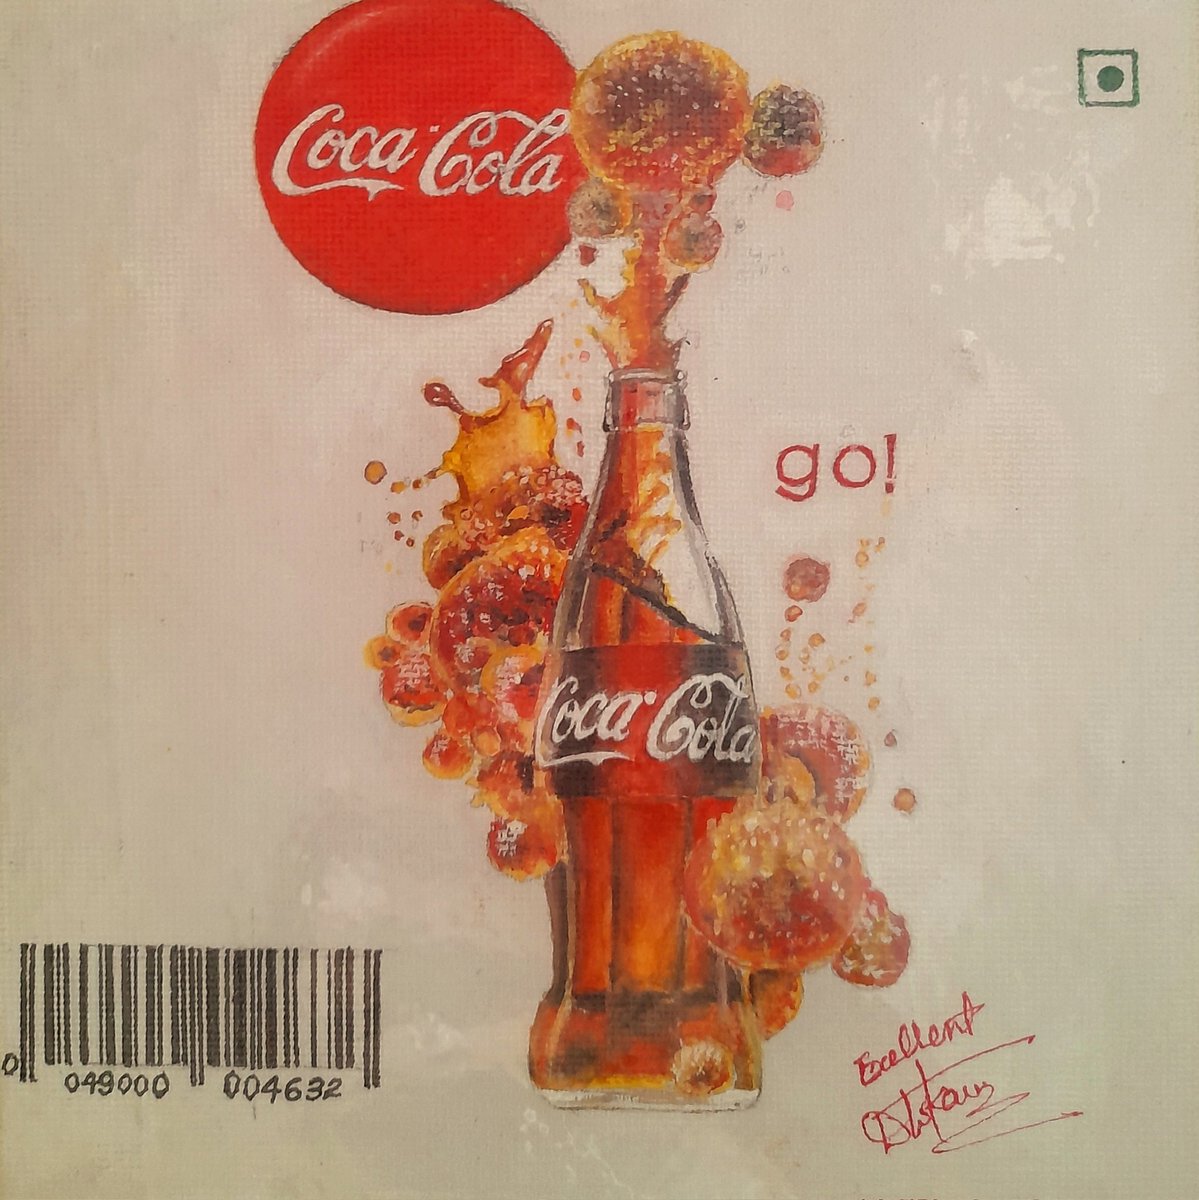 Water color painting 6x6 inchs DM for artwork Please subscribe my YouTube channel youtube.com/c/beantbhattia… #art #Artist #painting #Watercolor #Commercial #CocaCola #CocaColaXMarshmello #drinks #sketch #Punjab #PreyMovie #dew